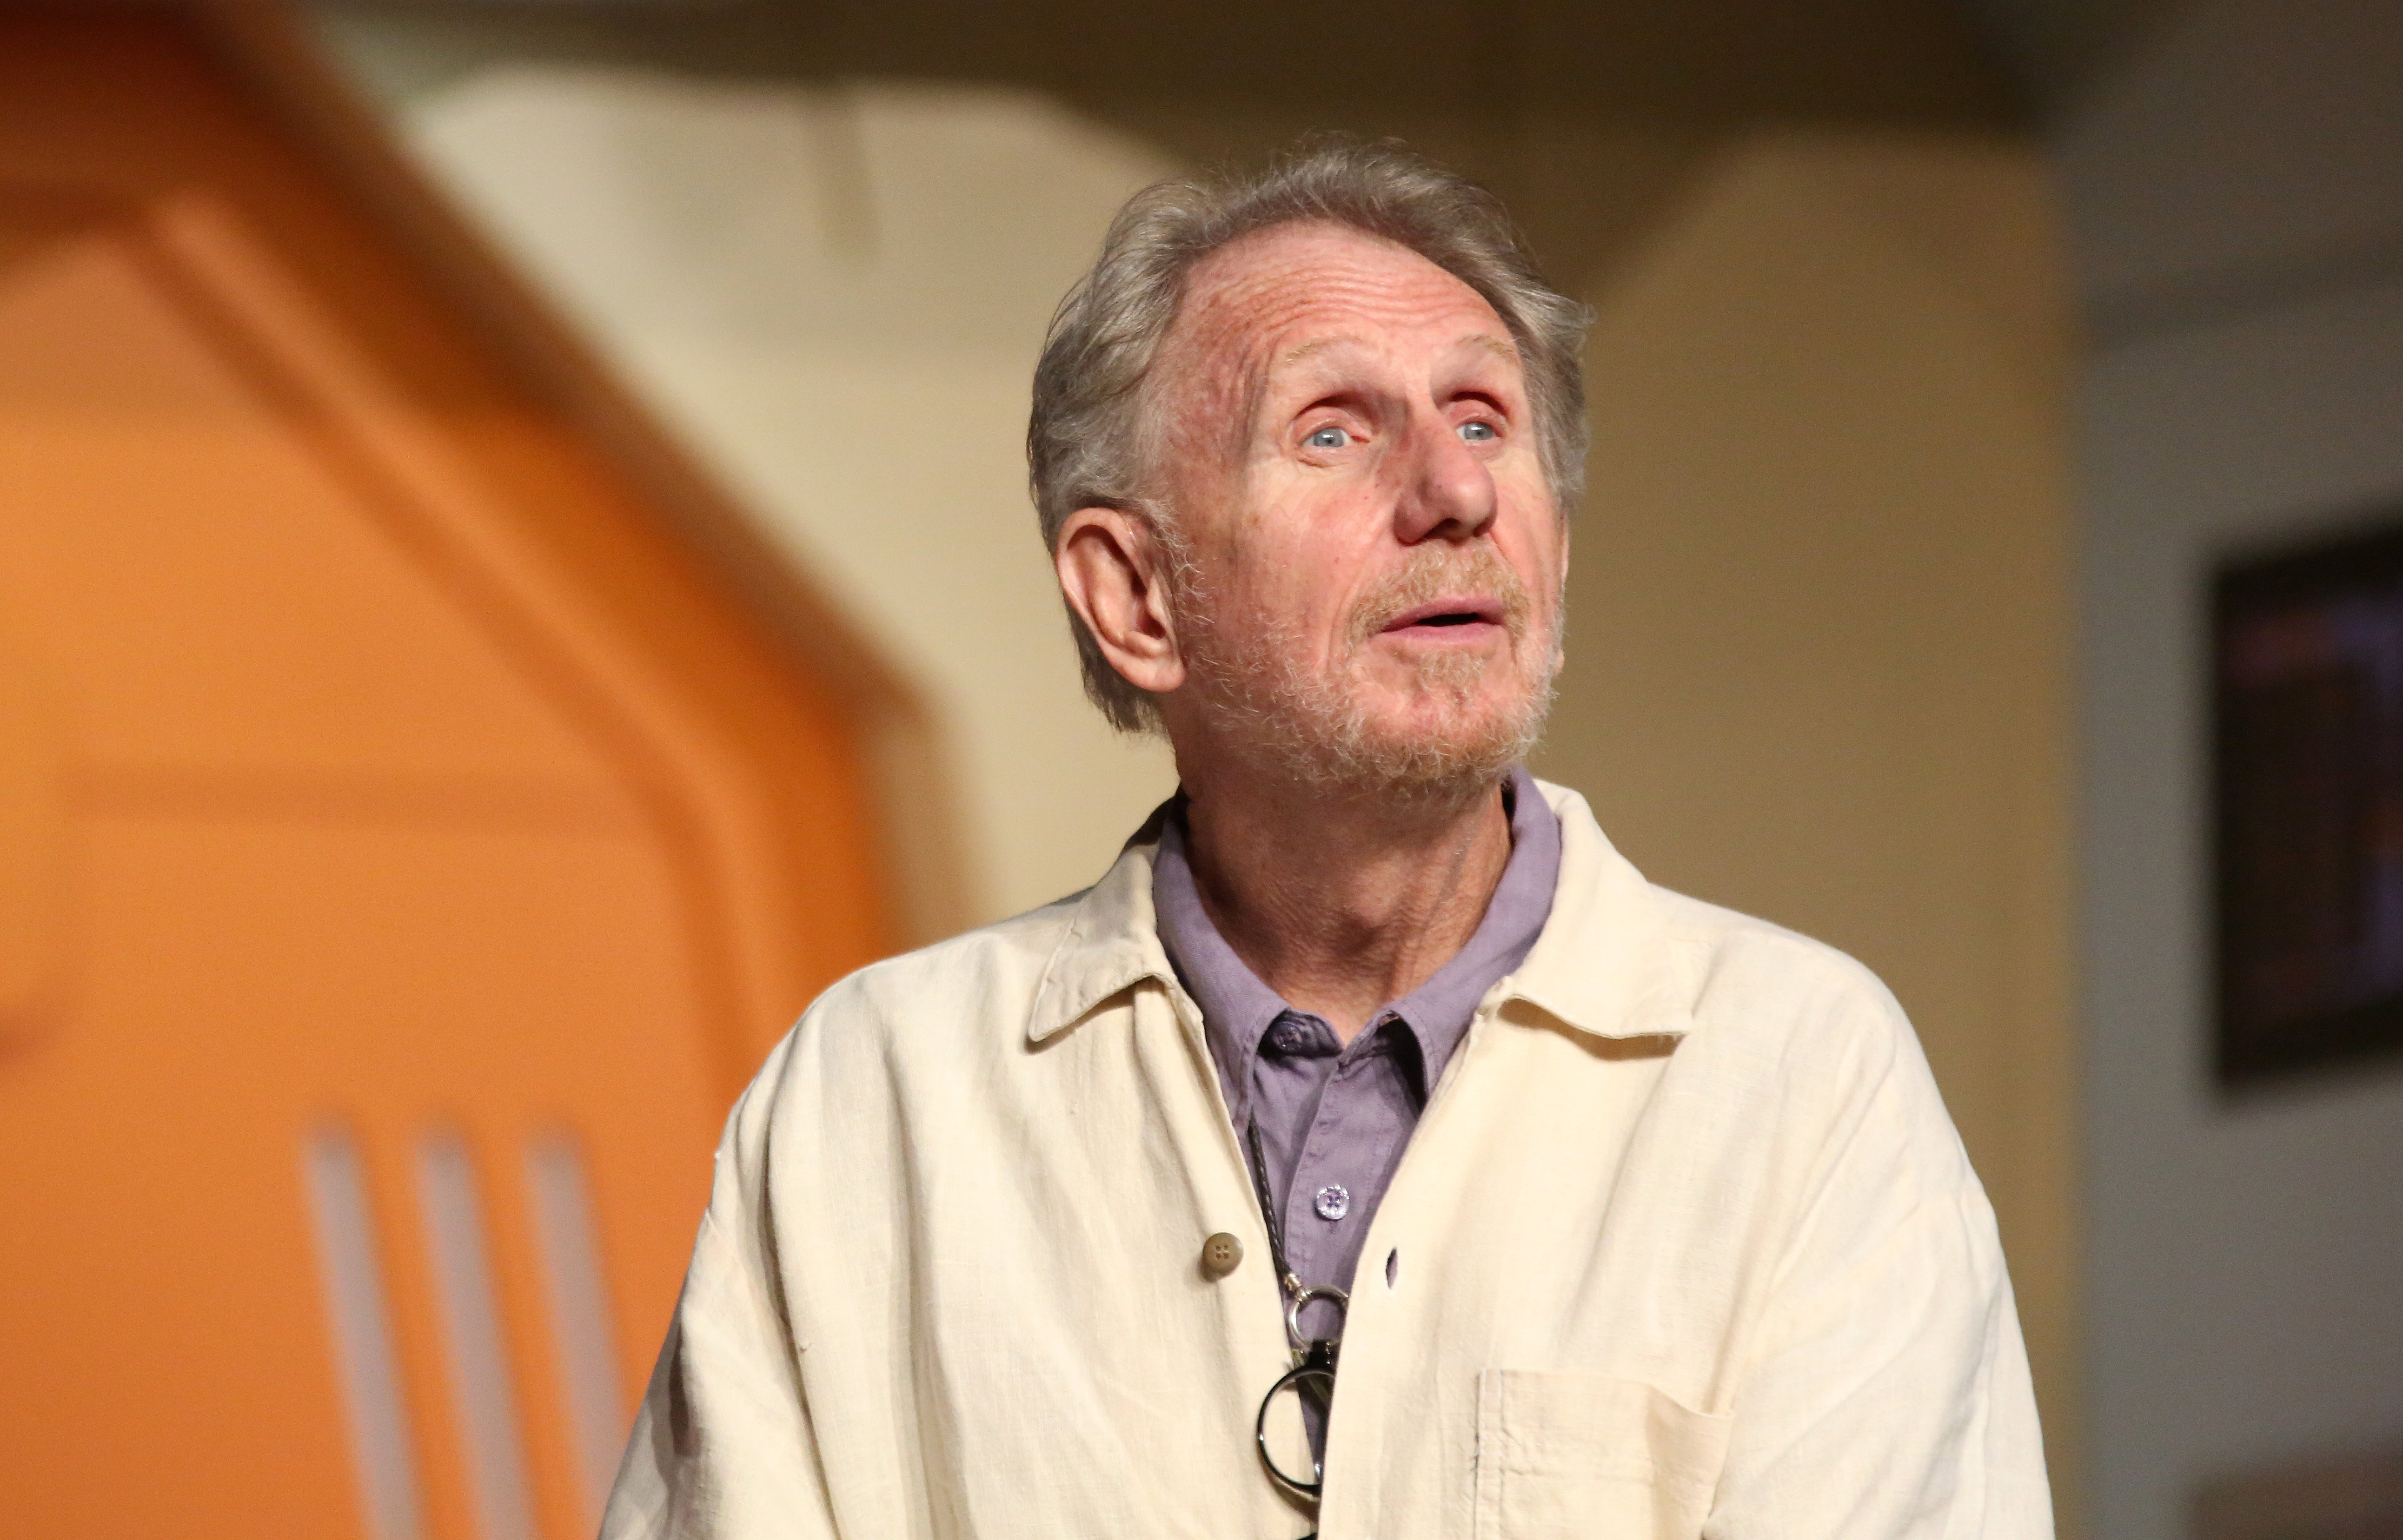 Rene Auberjonois at  the "Star Trek: Deep Space Nine Favorites" panel at the 14th annual official Star Trek convention on August 7, 2015 in Las Vegas. | Source: Getty Image